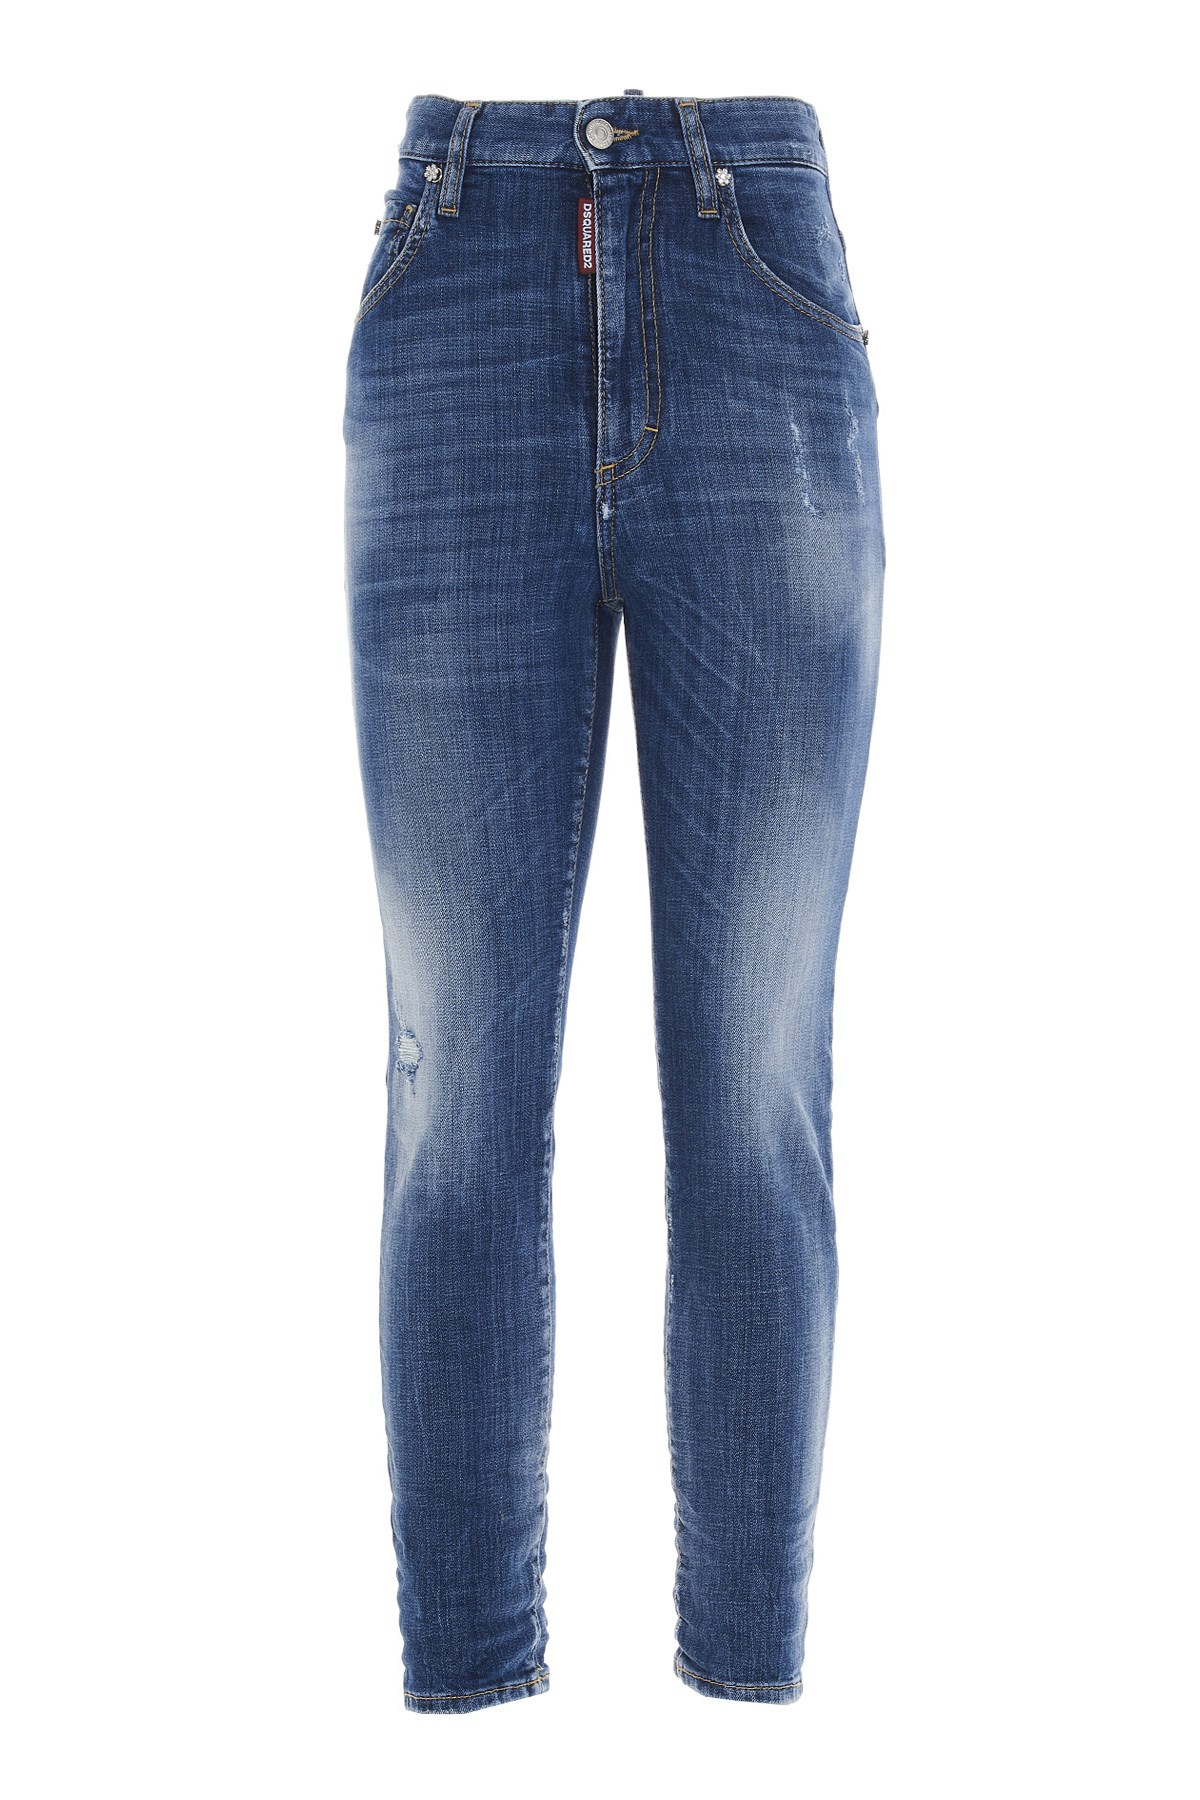 DSQUARED2 Jeans 'Twiggy'